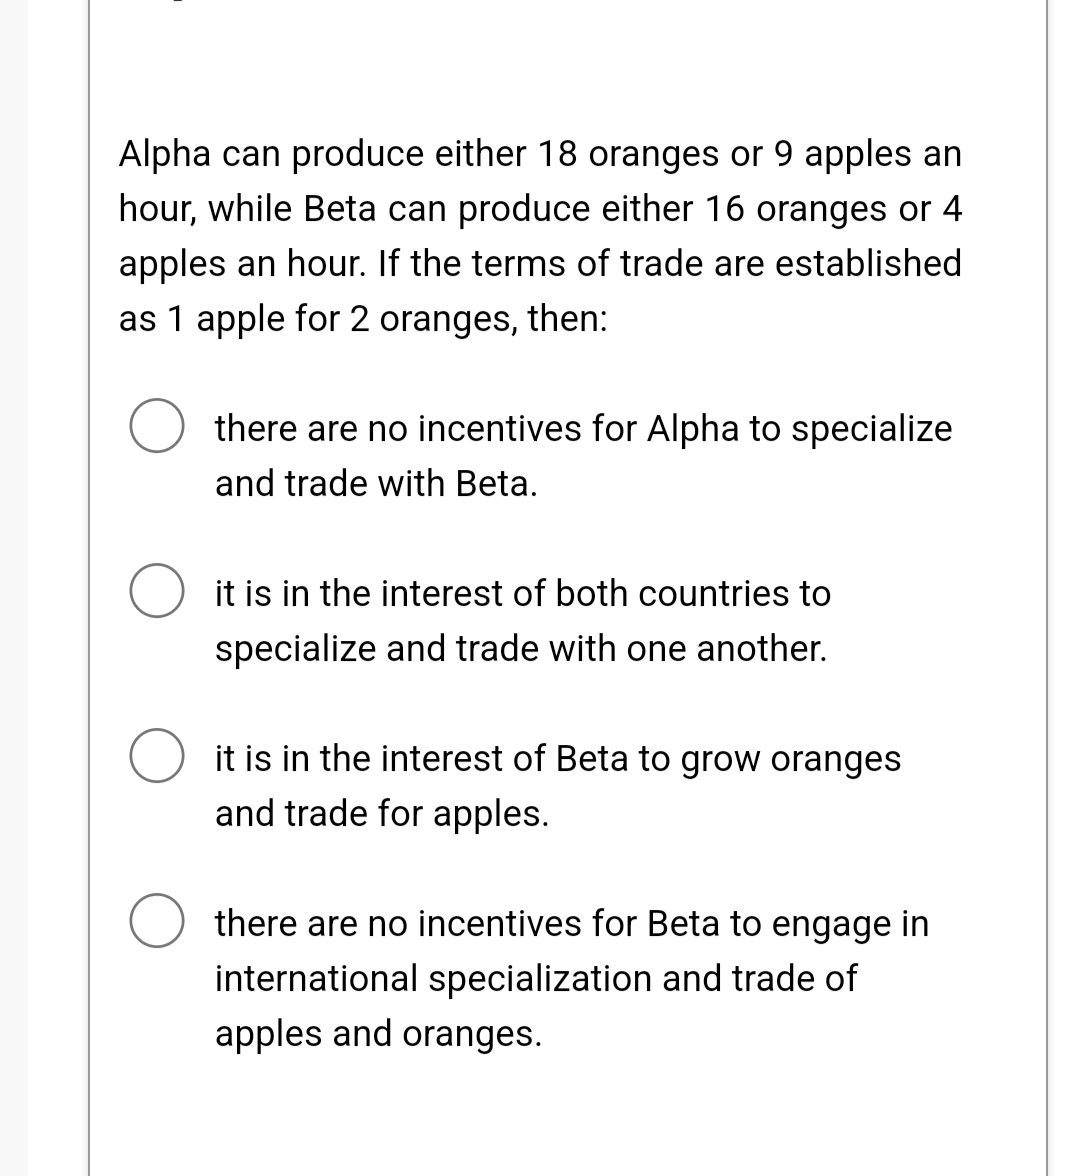 Alpha can produce either 18 oranges or 9 apples an
hour, while Beta can produce either 16 oranges or 4
apples an hour. If the terms of trade are established
as 1 apple for 2 oranges, then:
there are no incentives for Alpha to specialize
and trade with Beta.
it is in the interest of both countries to
specialize and trade with one another.
it is in the interest of Beta to grow oranges
and trade for apples.
there are no incentives for Beta to engage in
international specialization and trade of
apples and oranges.